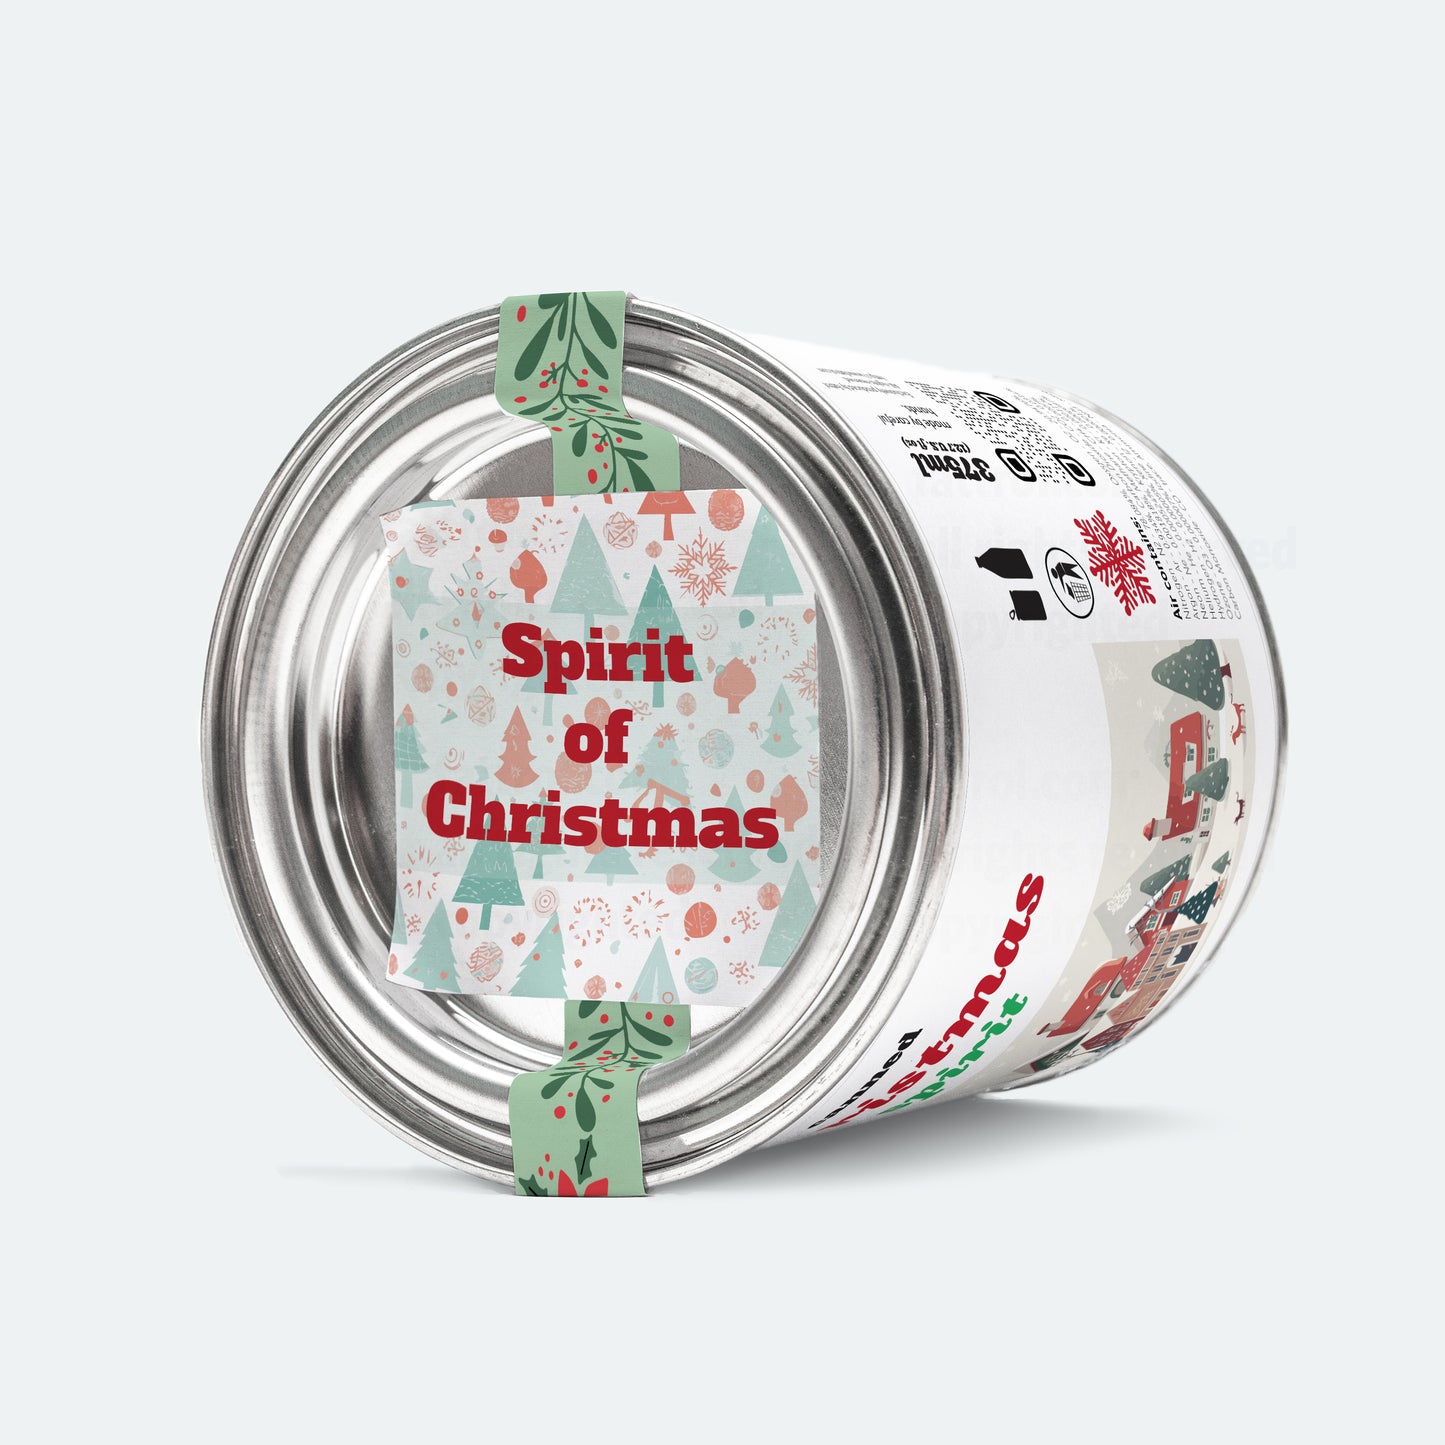 Canned Christmas Spirit